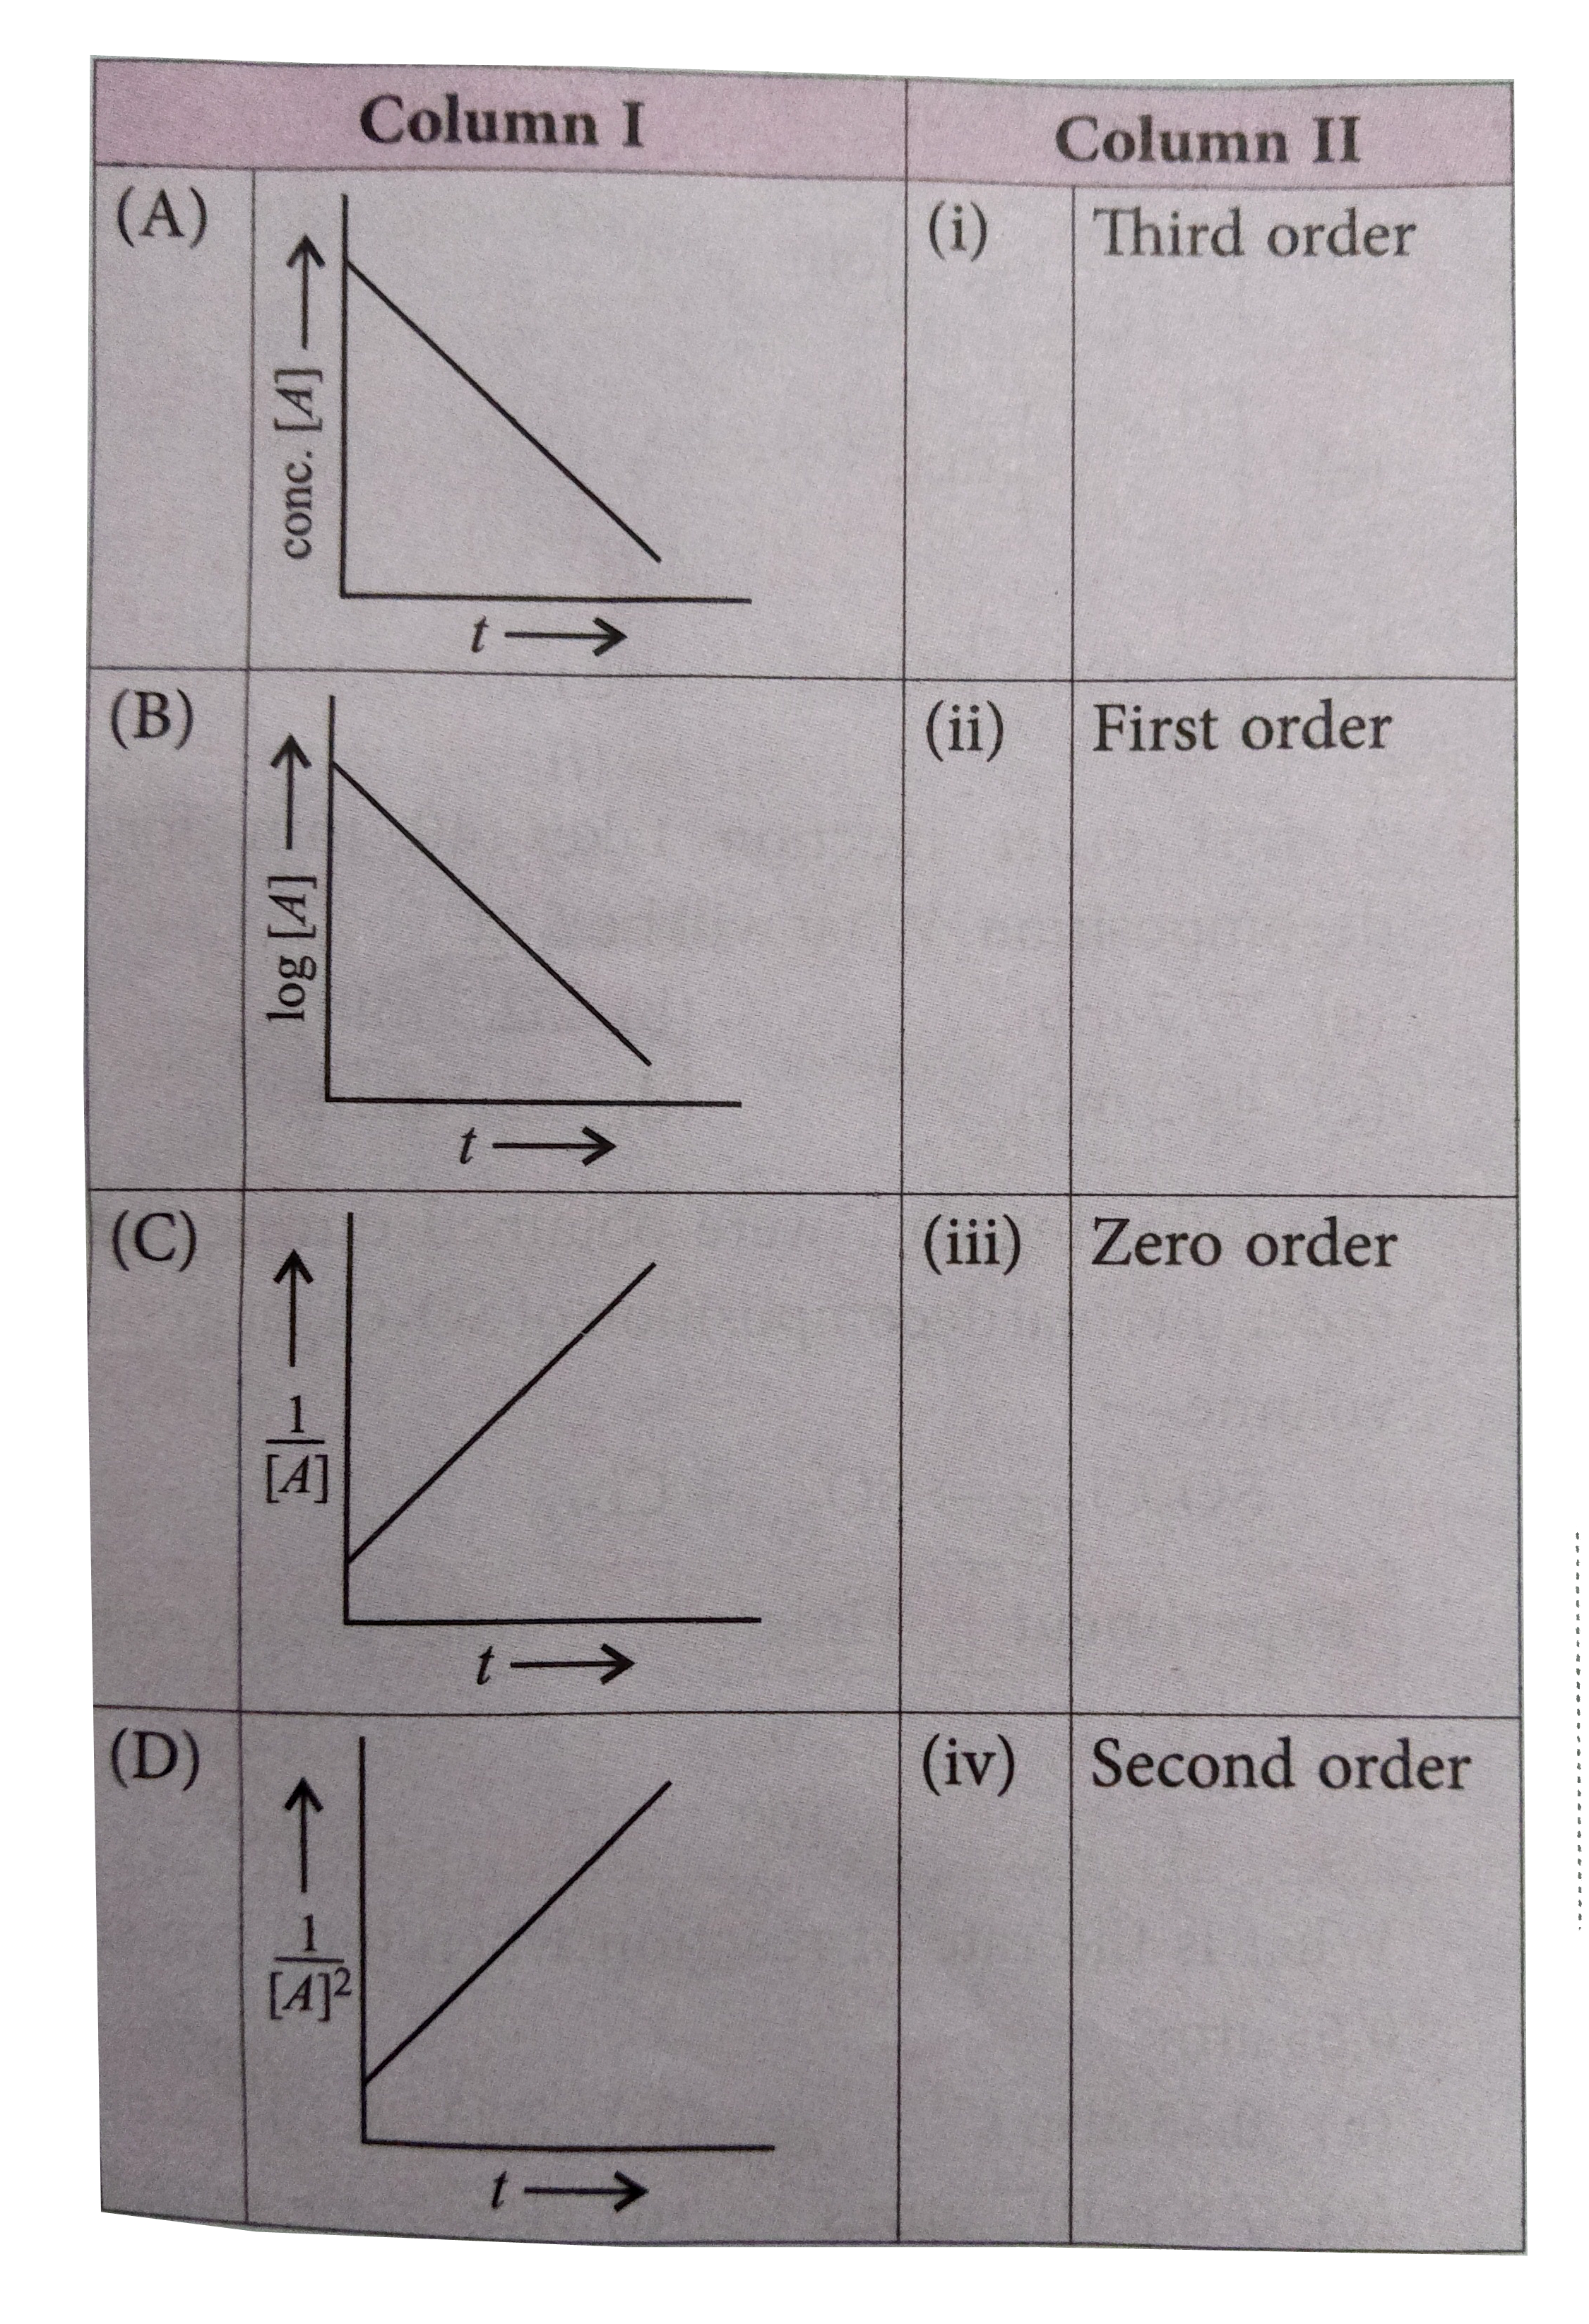 Match the graphs given in colum I with the order given in column II and mark the appropriate choice.